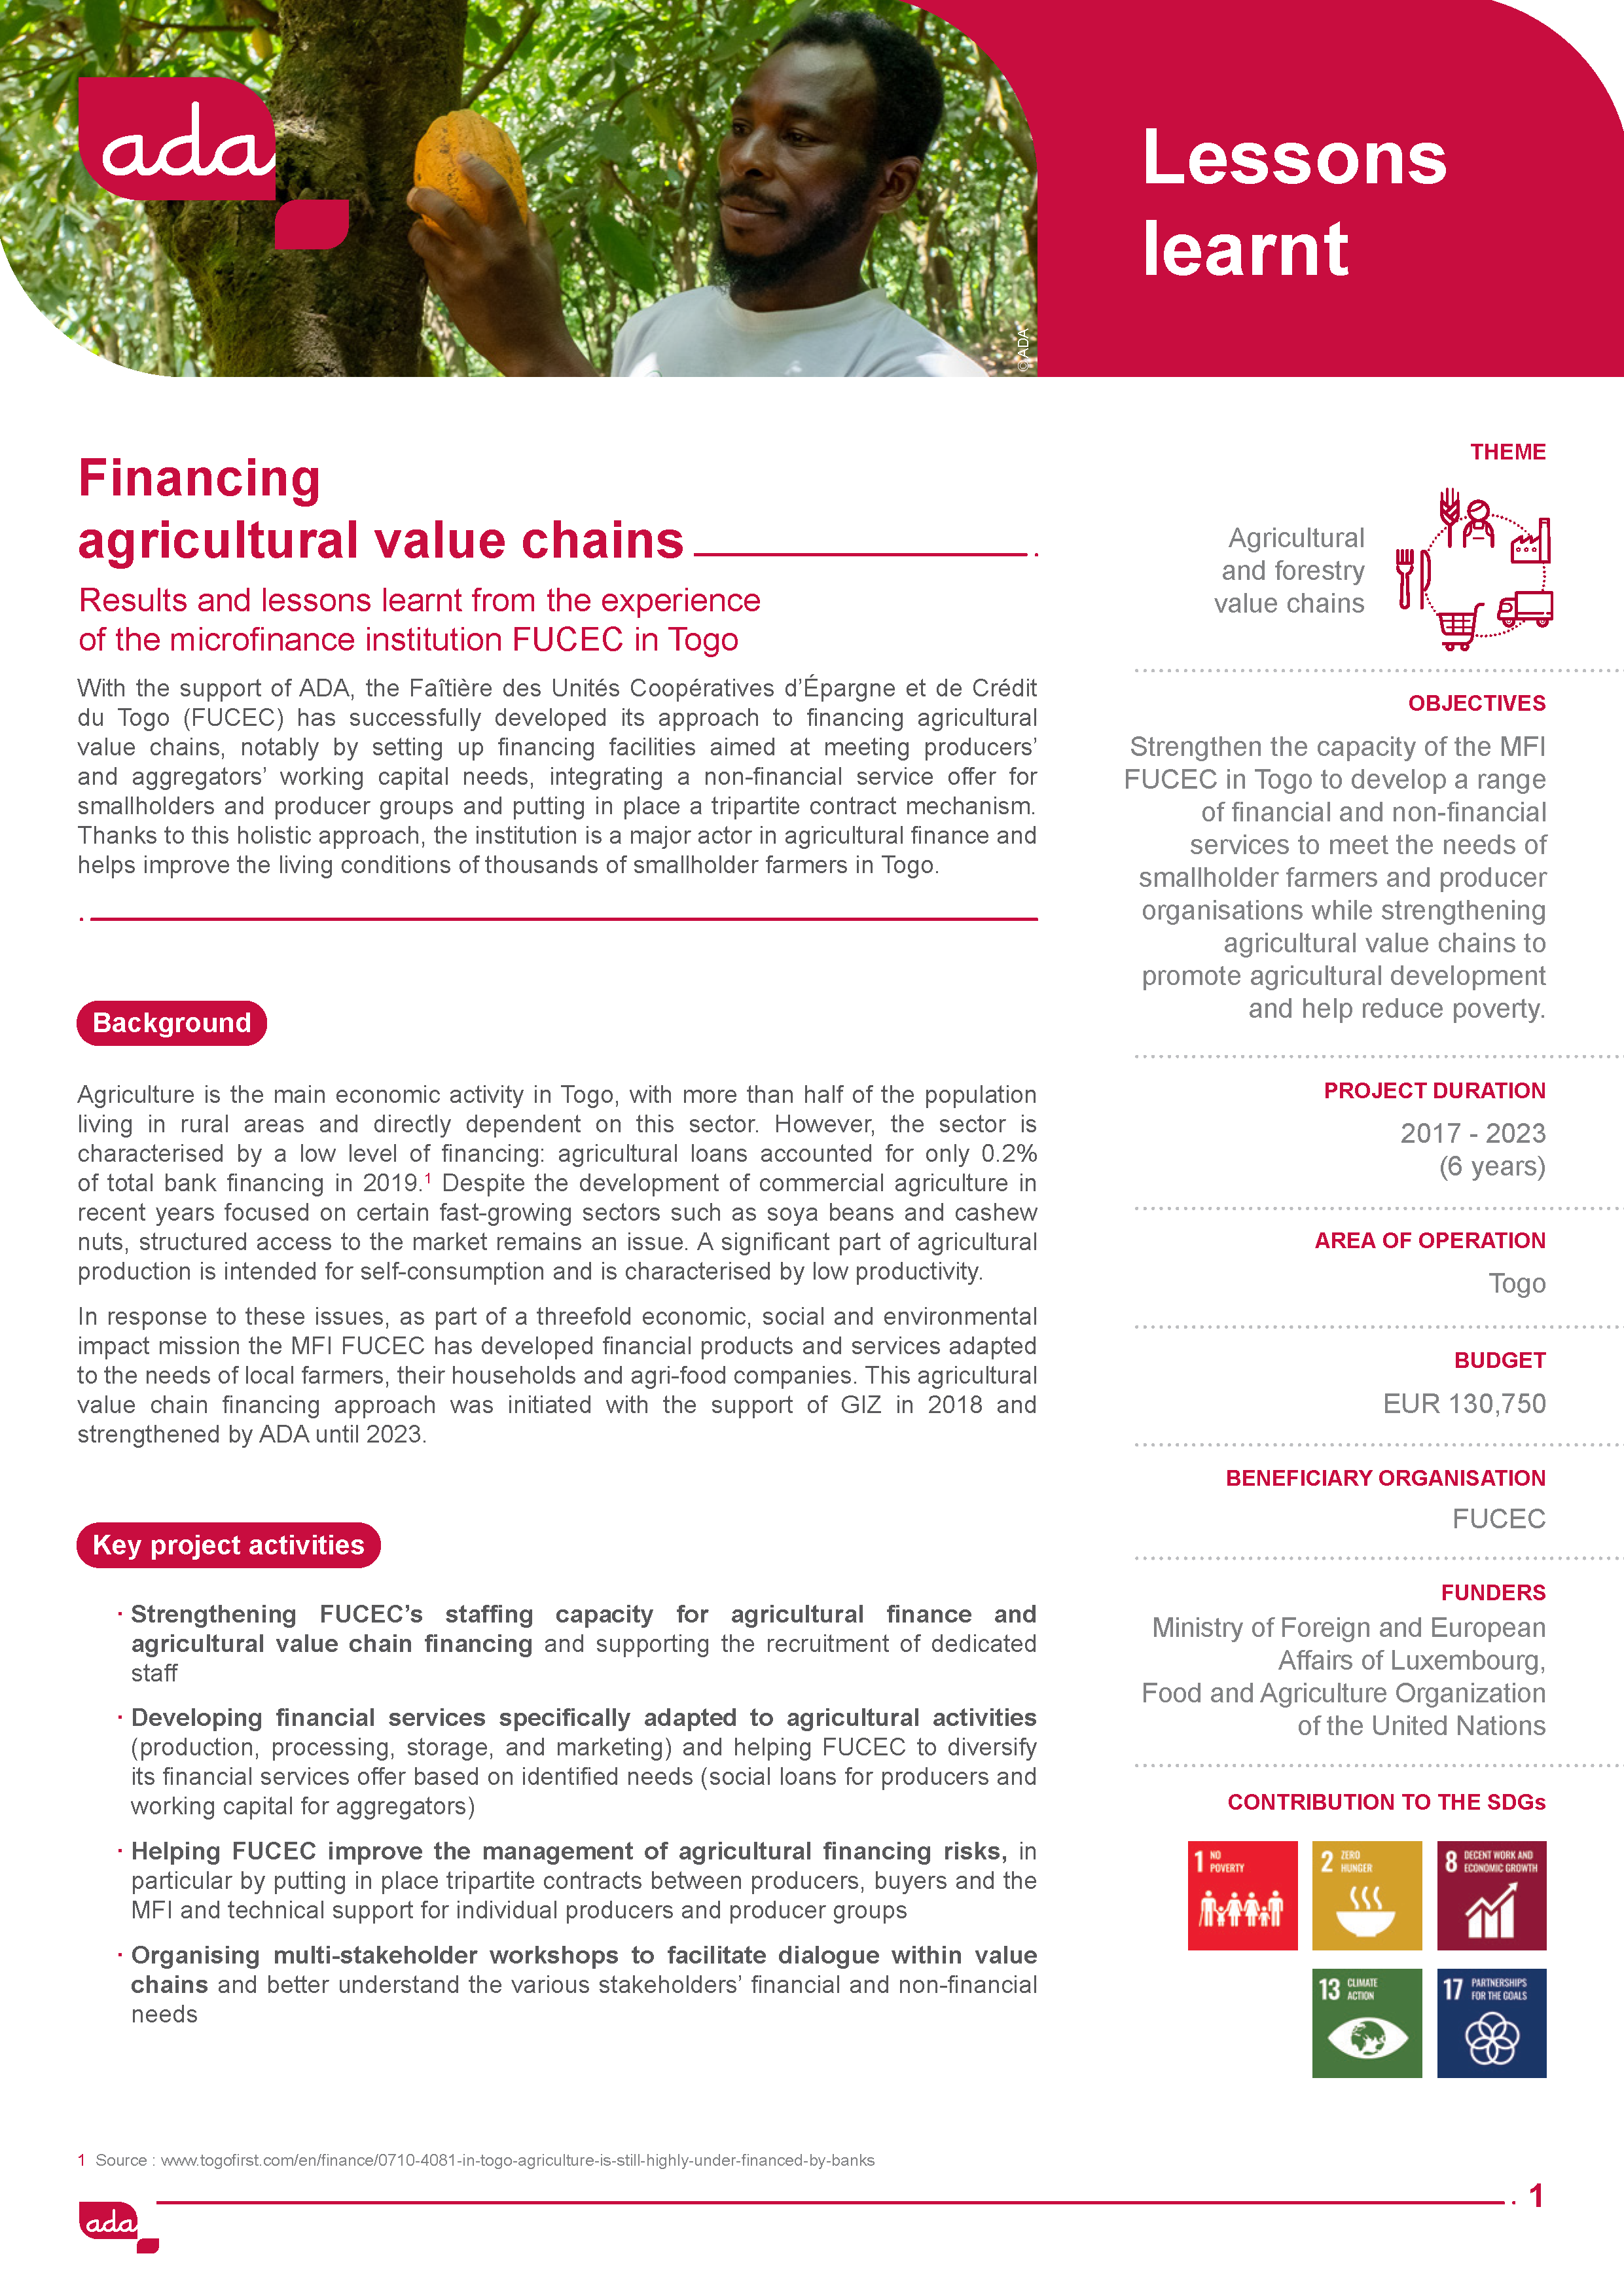 Results and lessons learnt from the experience of the microfinance institution FUCEC in Togo